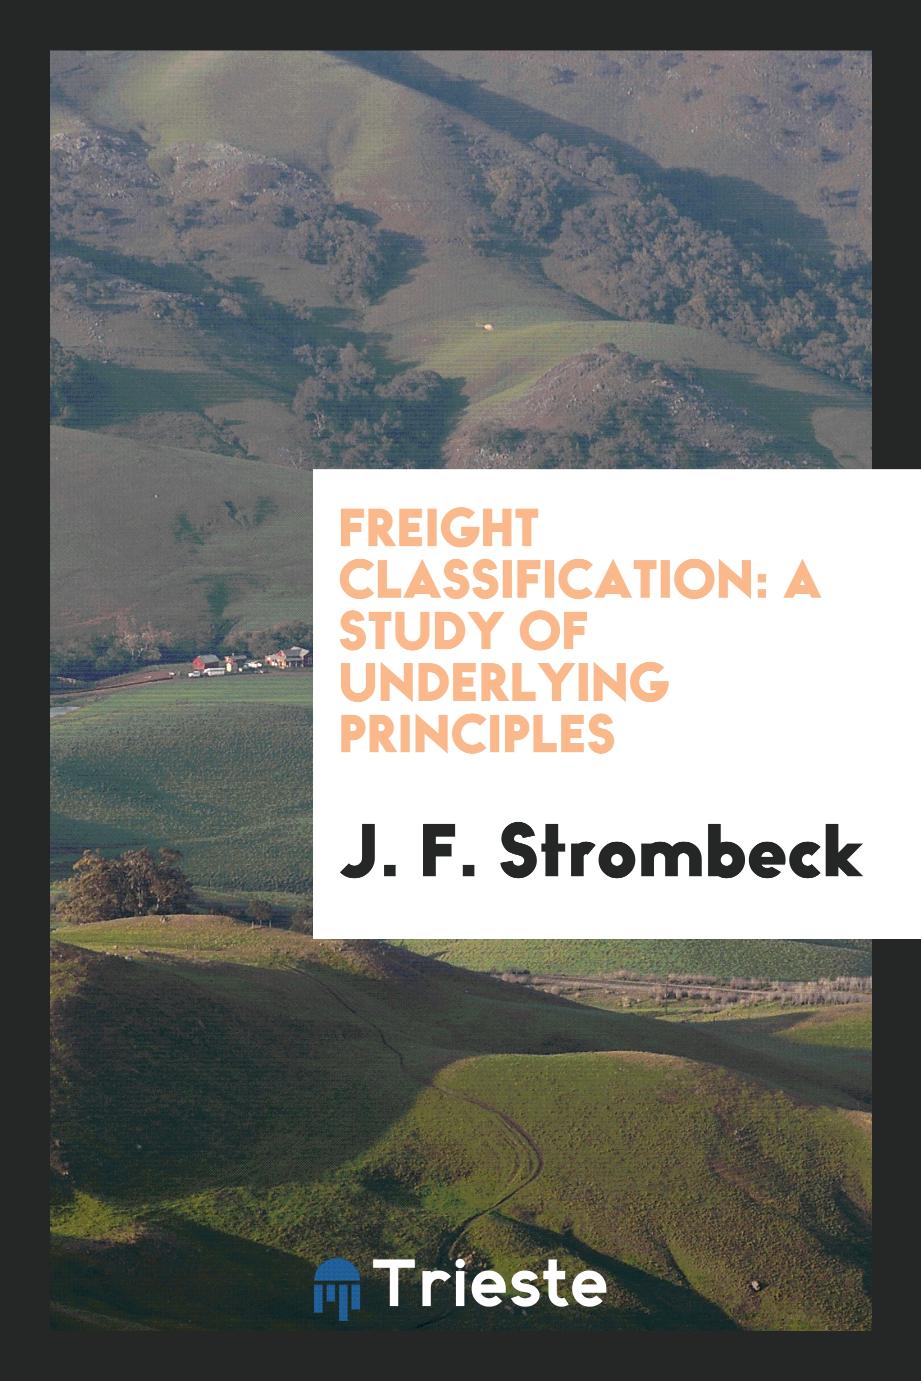 Freight Classification: A Study of Underlying Principles